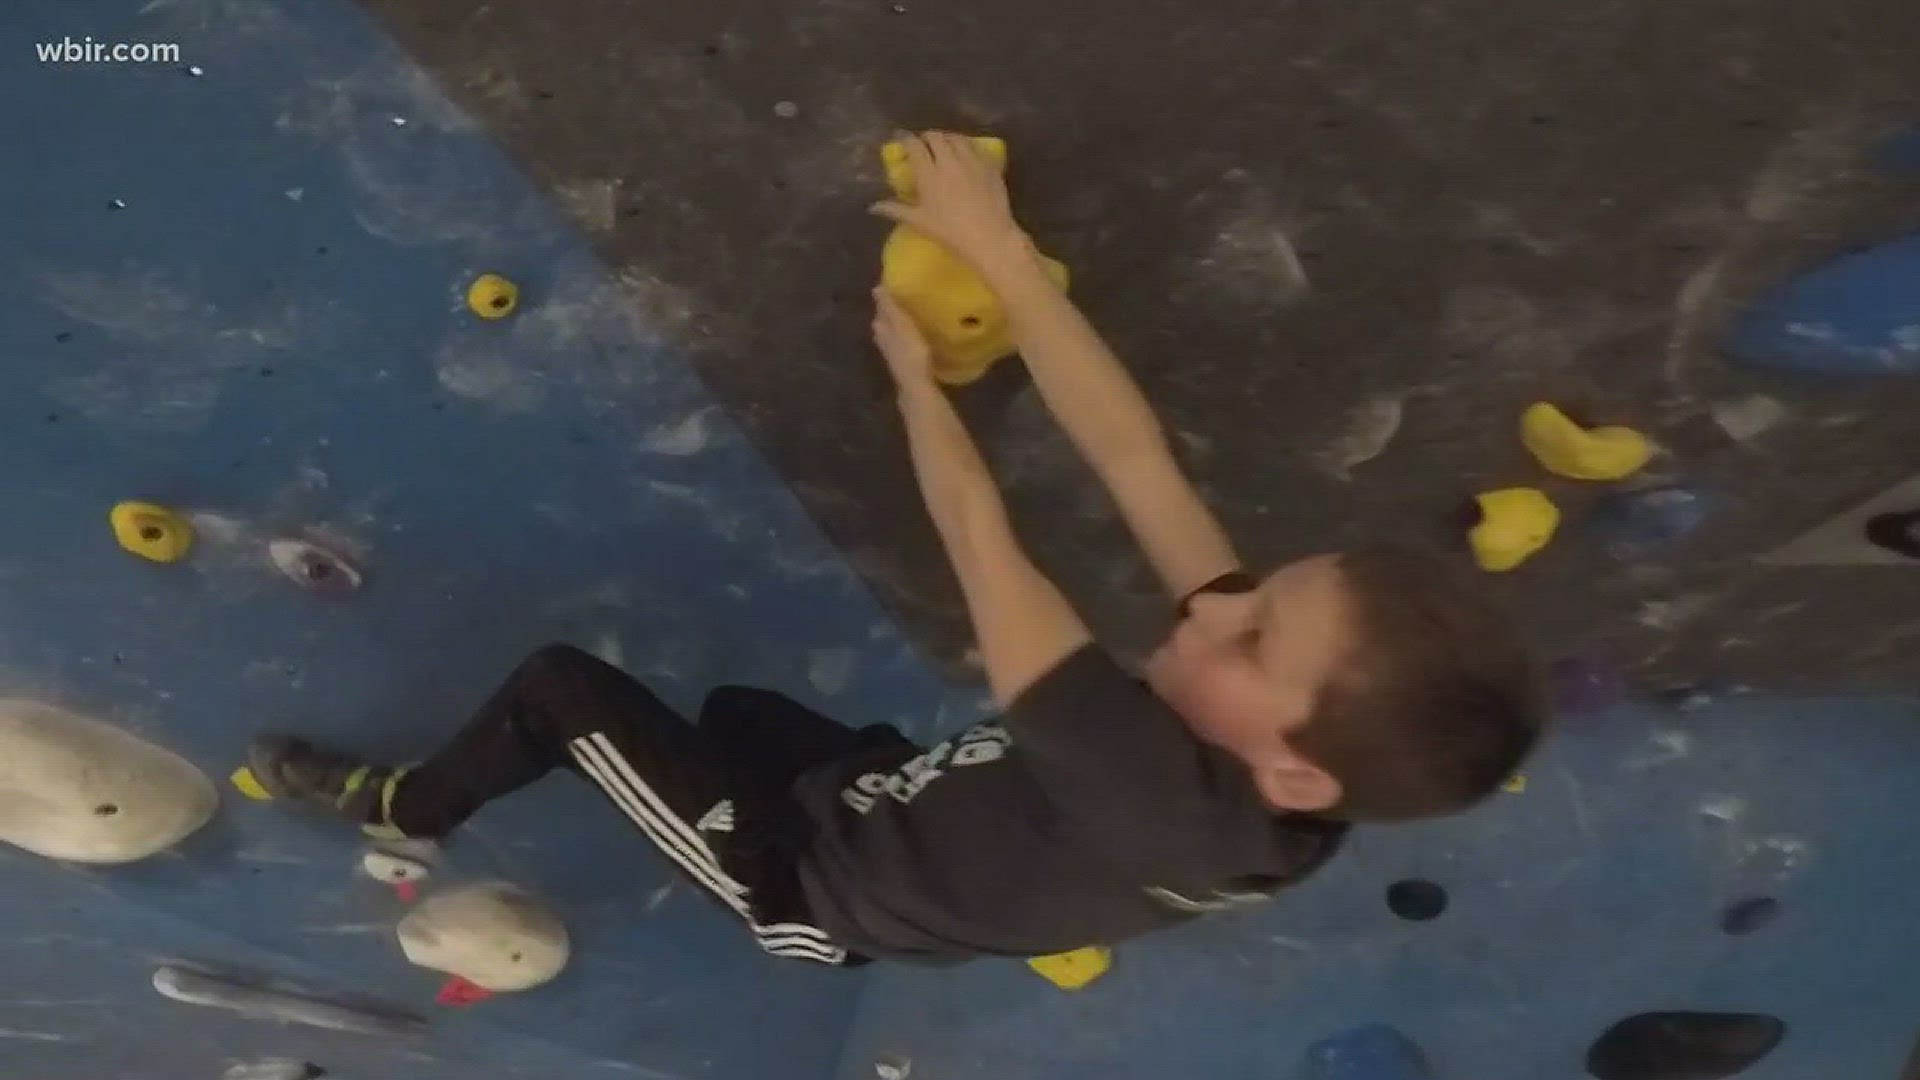 Three rock climbers quality for Nationals